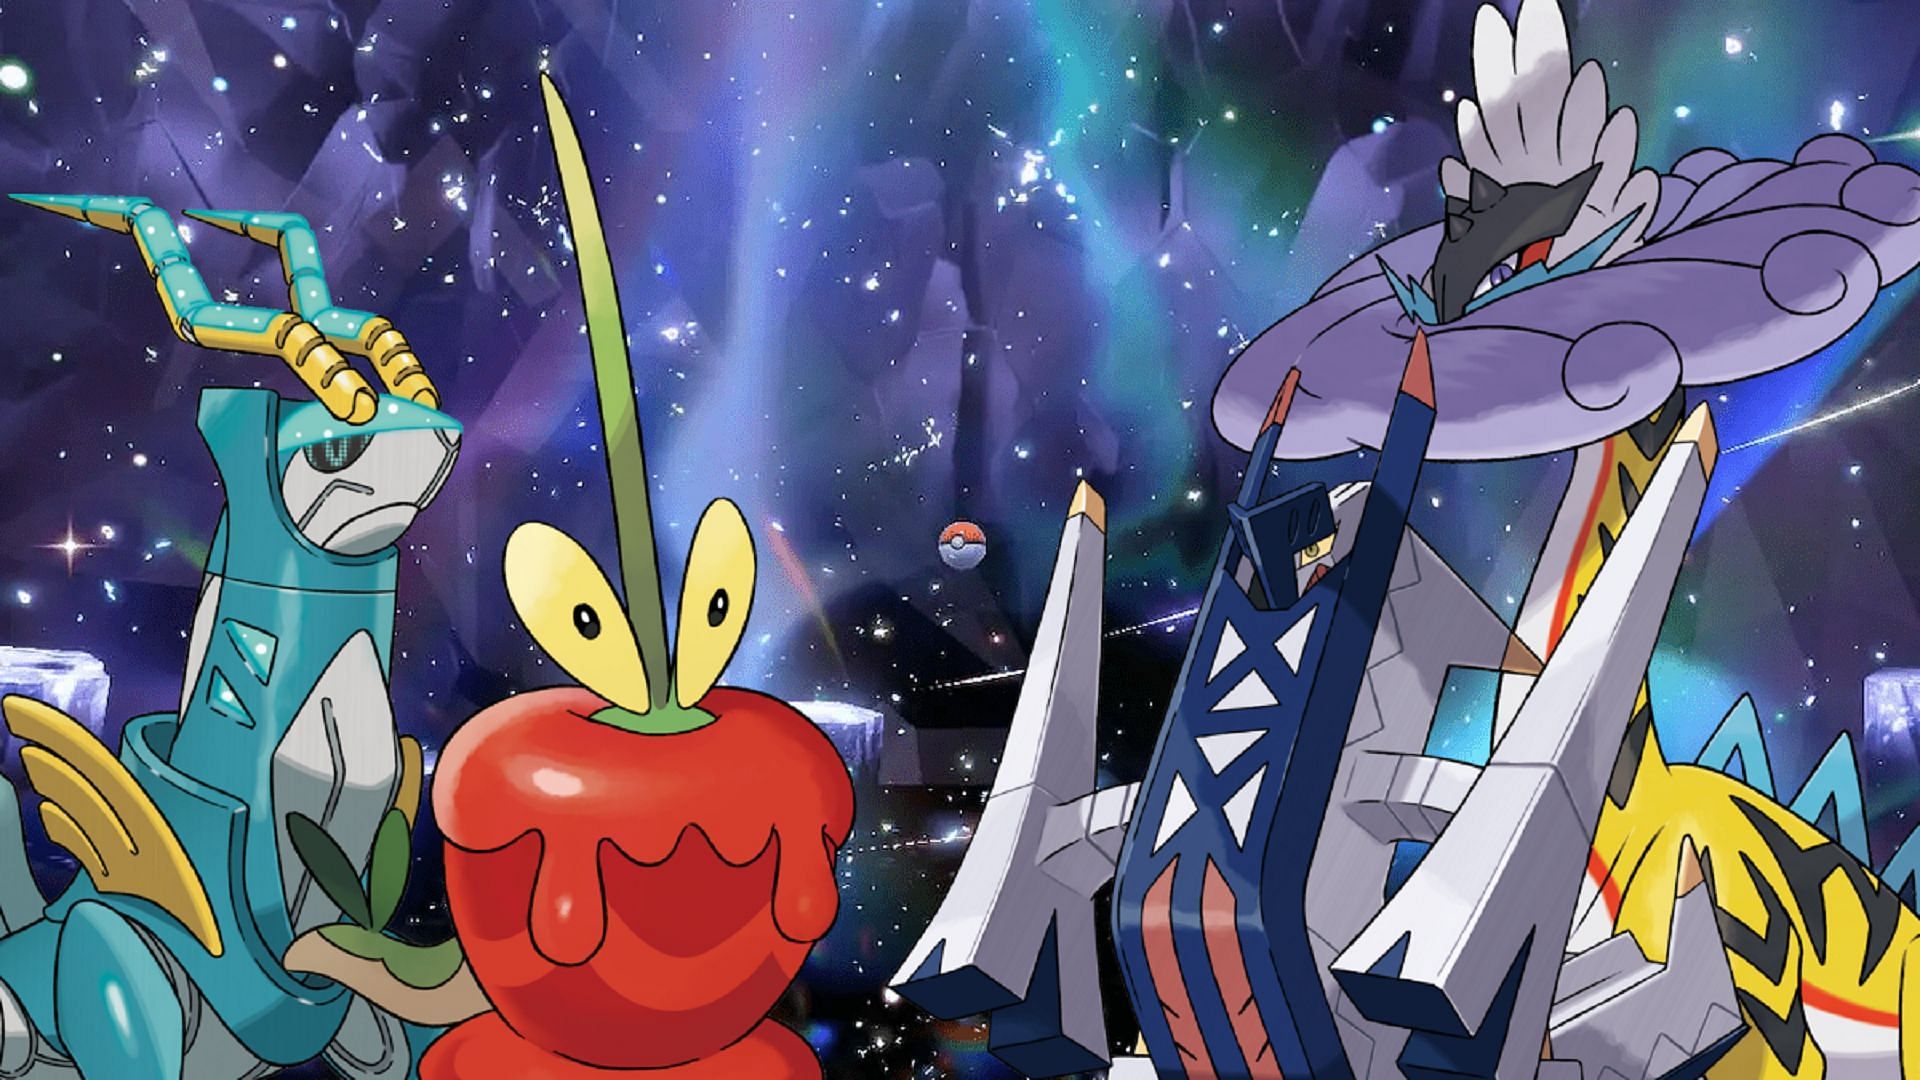 New Pokemon Anime Ends Ash Ketchum and Pikachu's Journey - GameRevolution